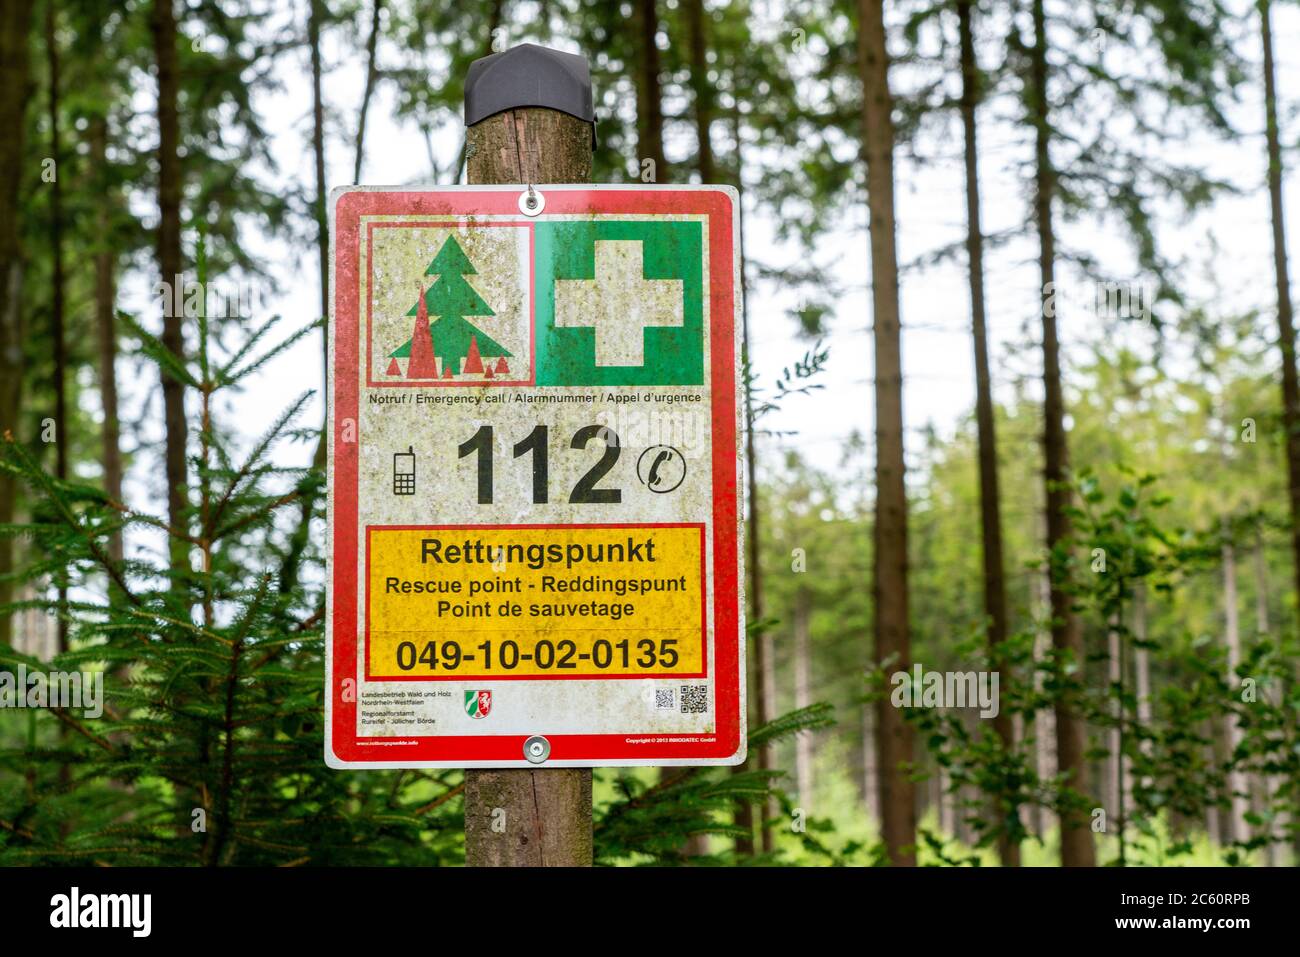 Rescue point system in German forests, on boards locations are indicated, which can be given in an emergency, the rescue services to guide them to an Stock Photo